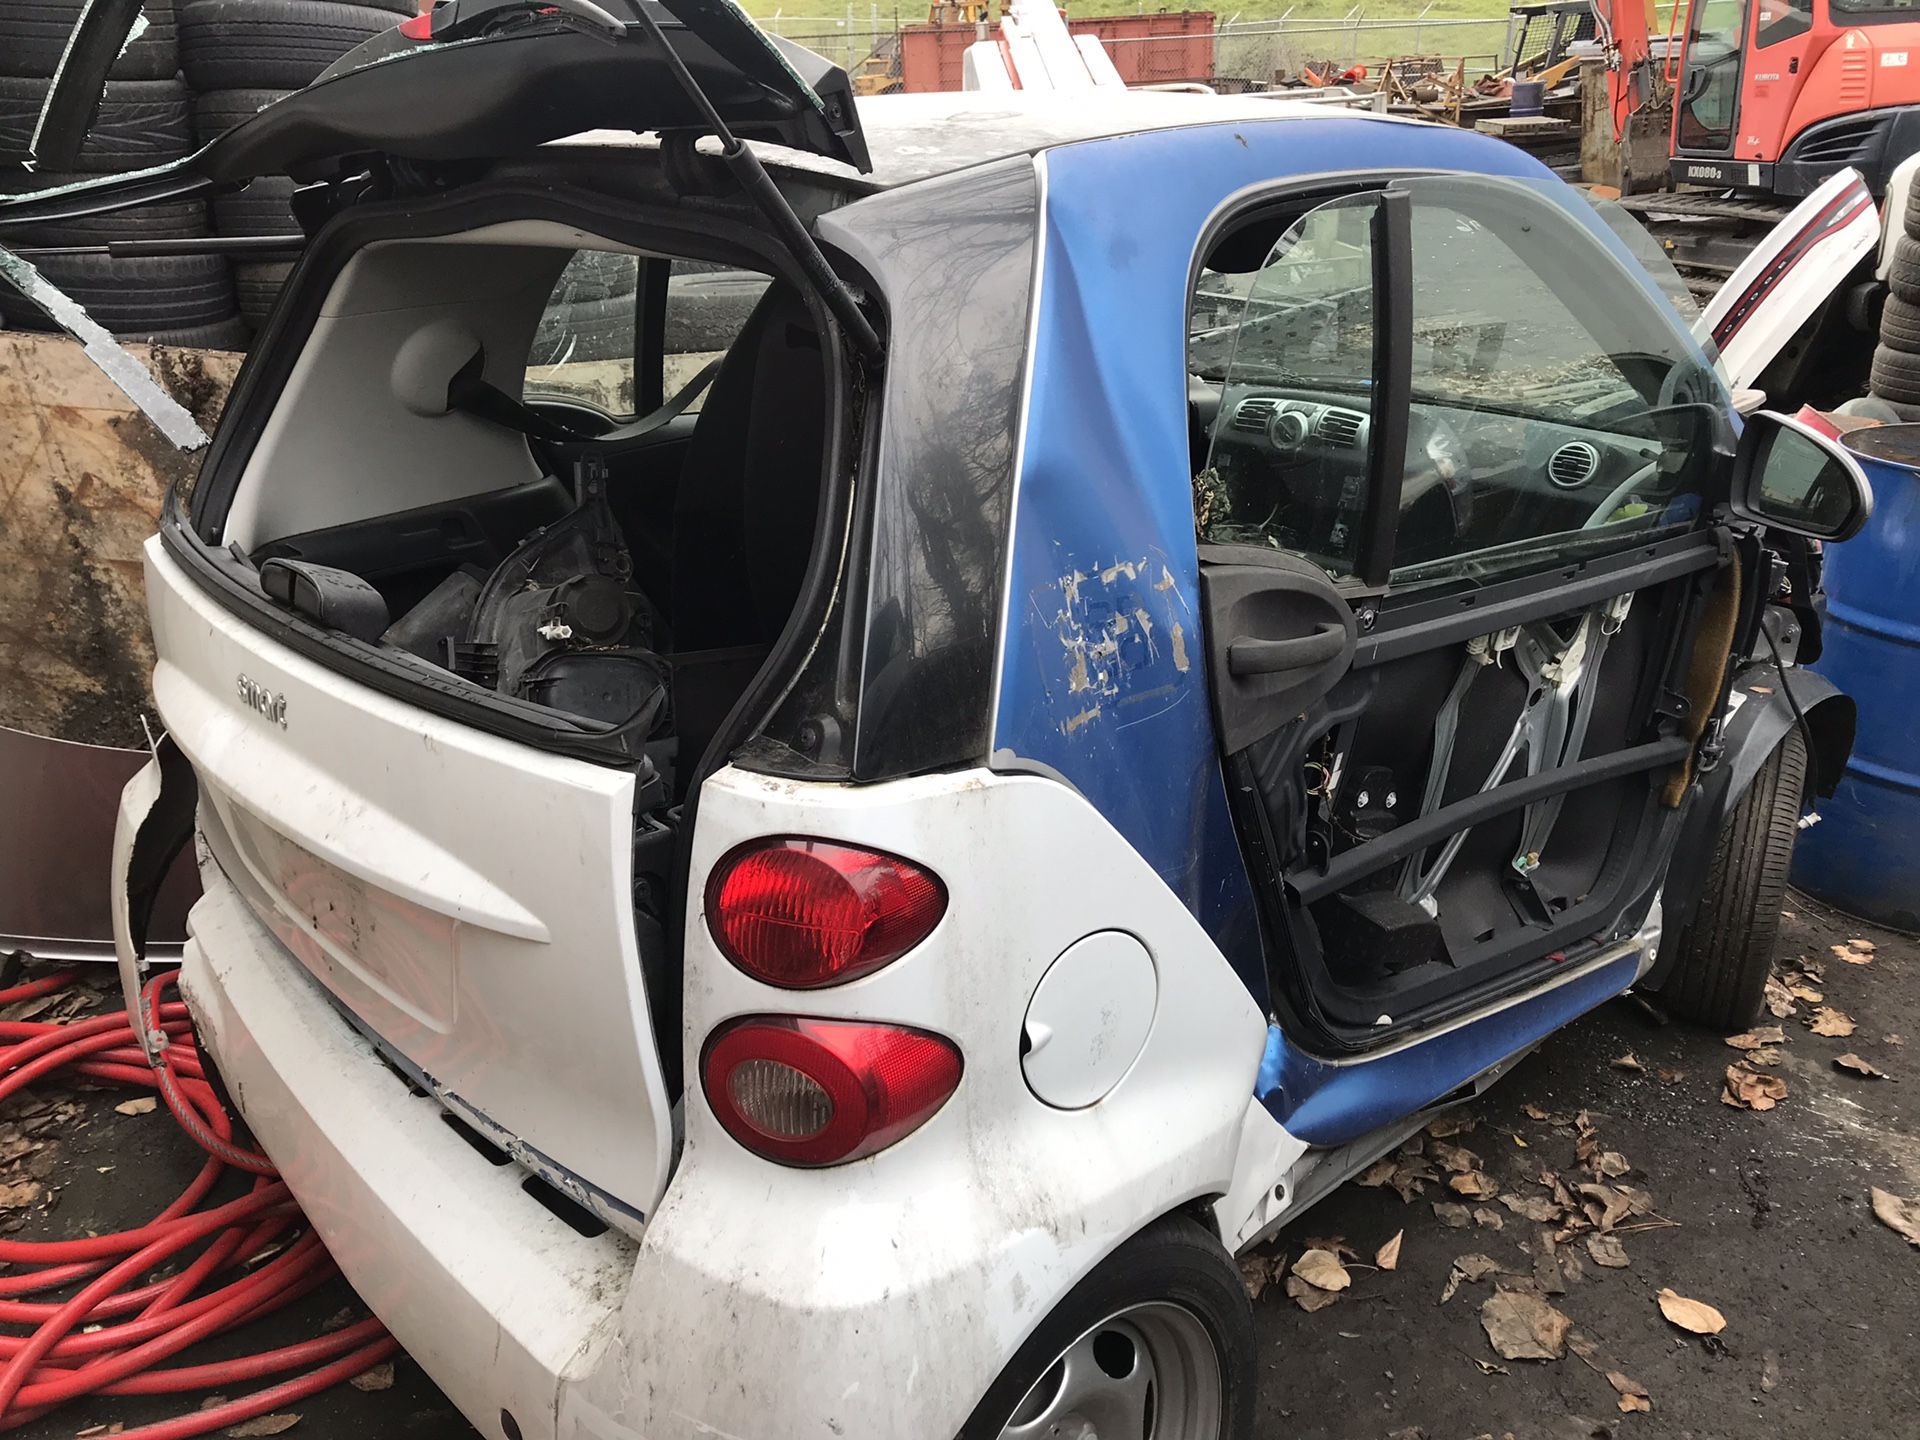 2012 - 2016 Smart car parts we have a few more of these Smart cars as well for parts!